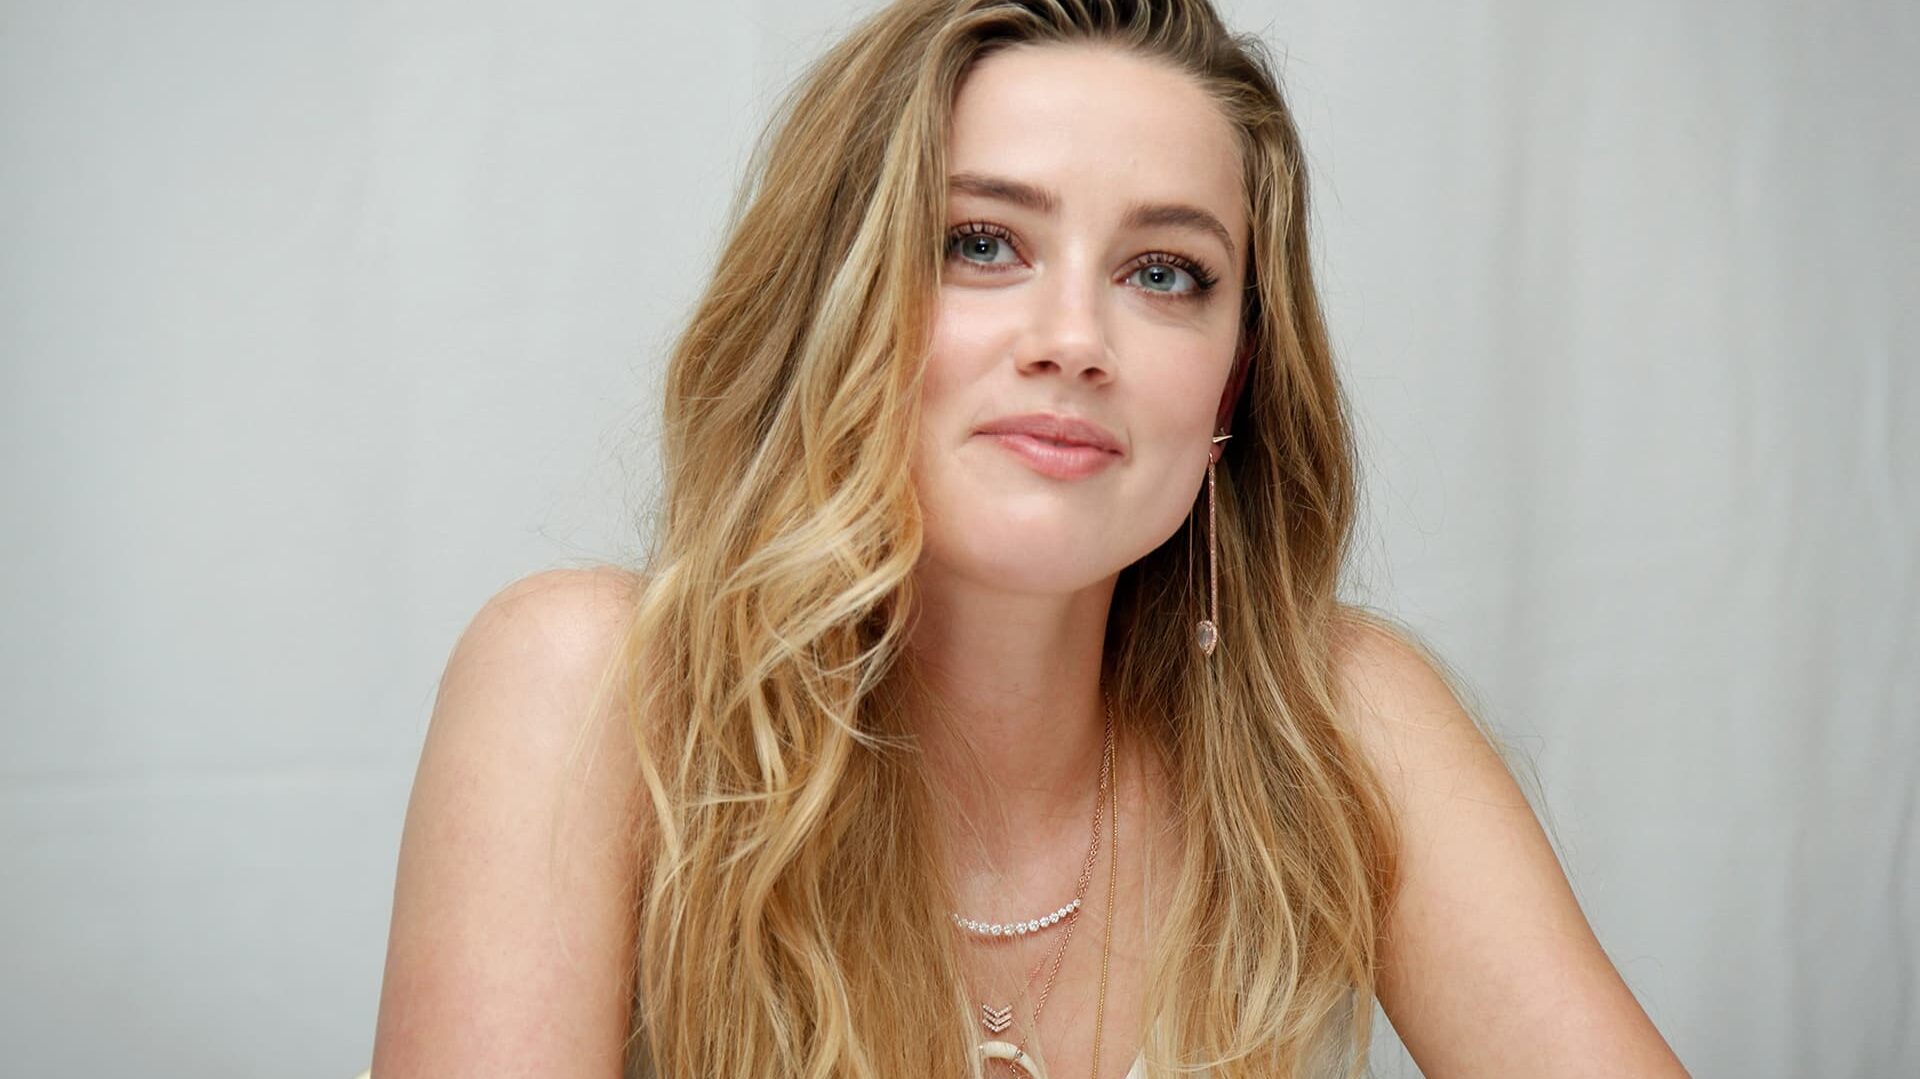 Amber Heard's is one of the sexy actress of Hollywood